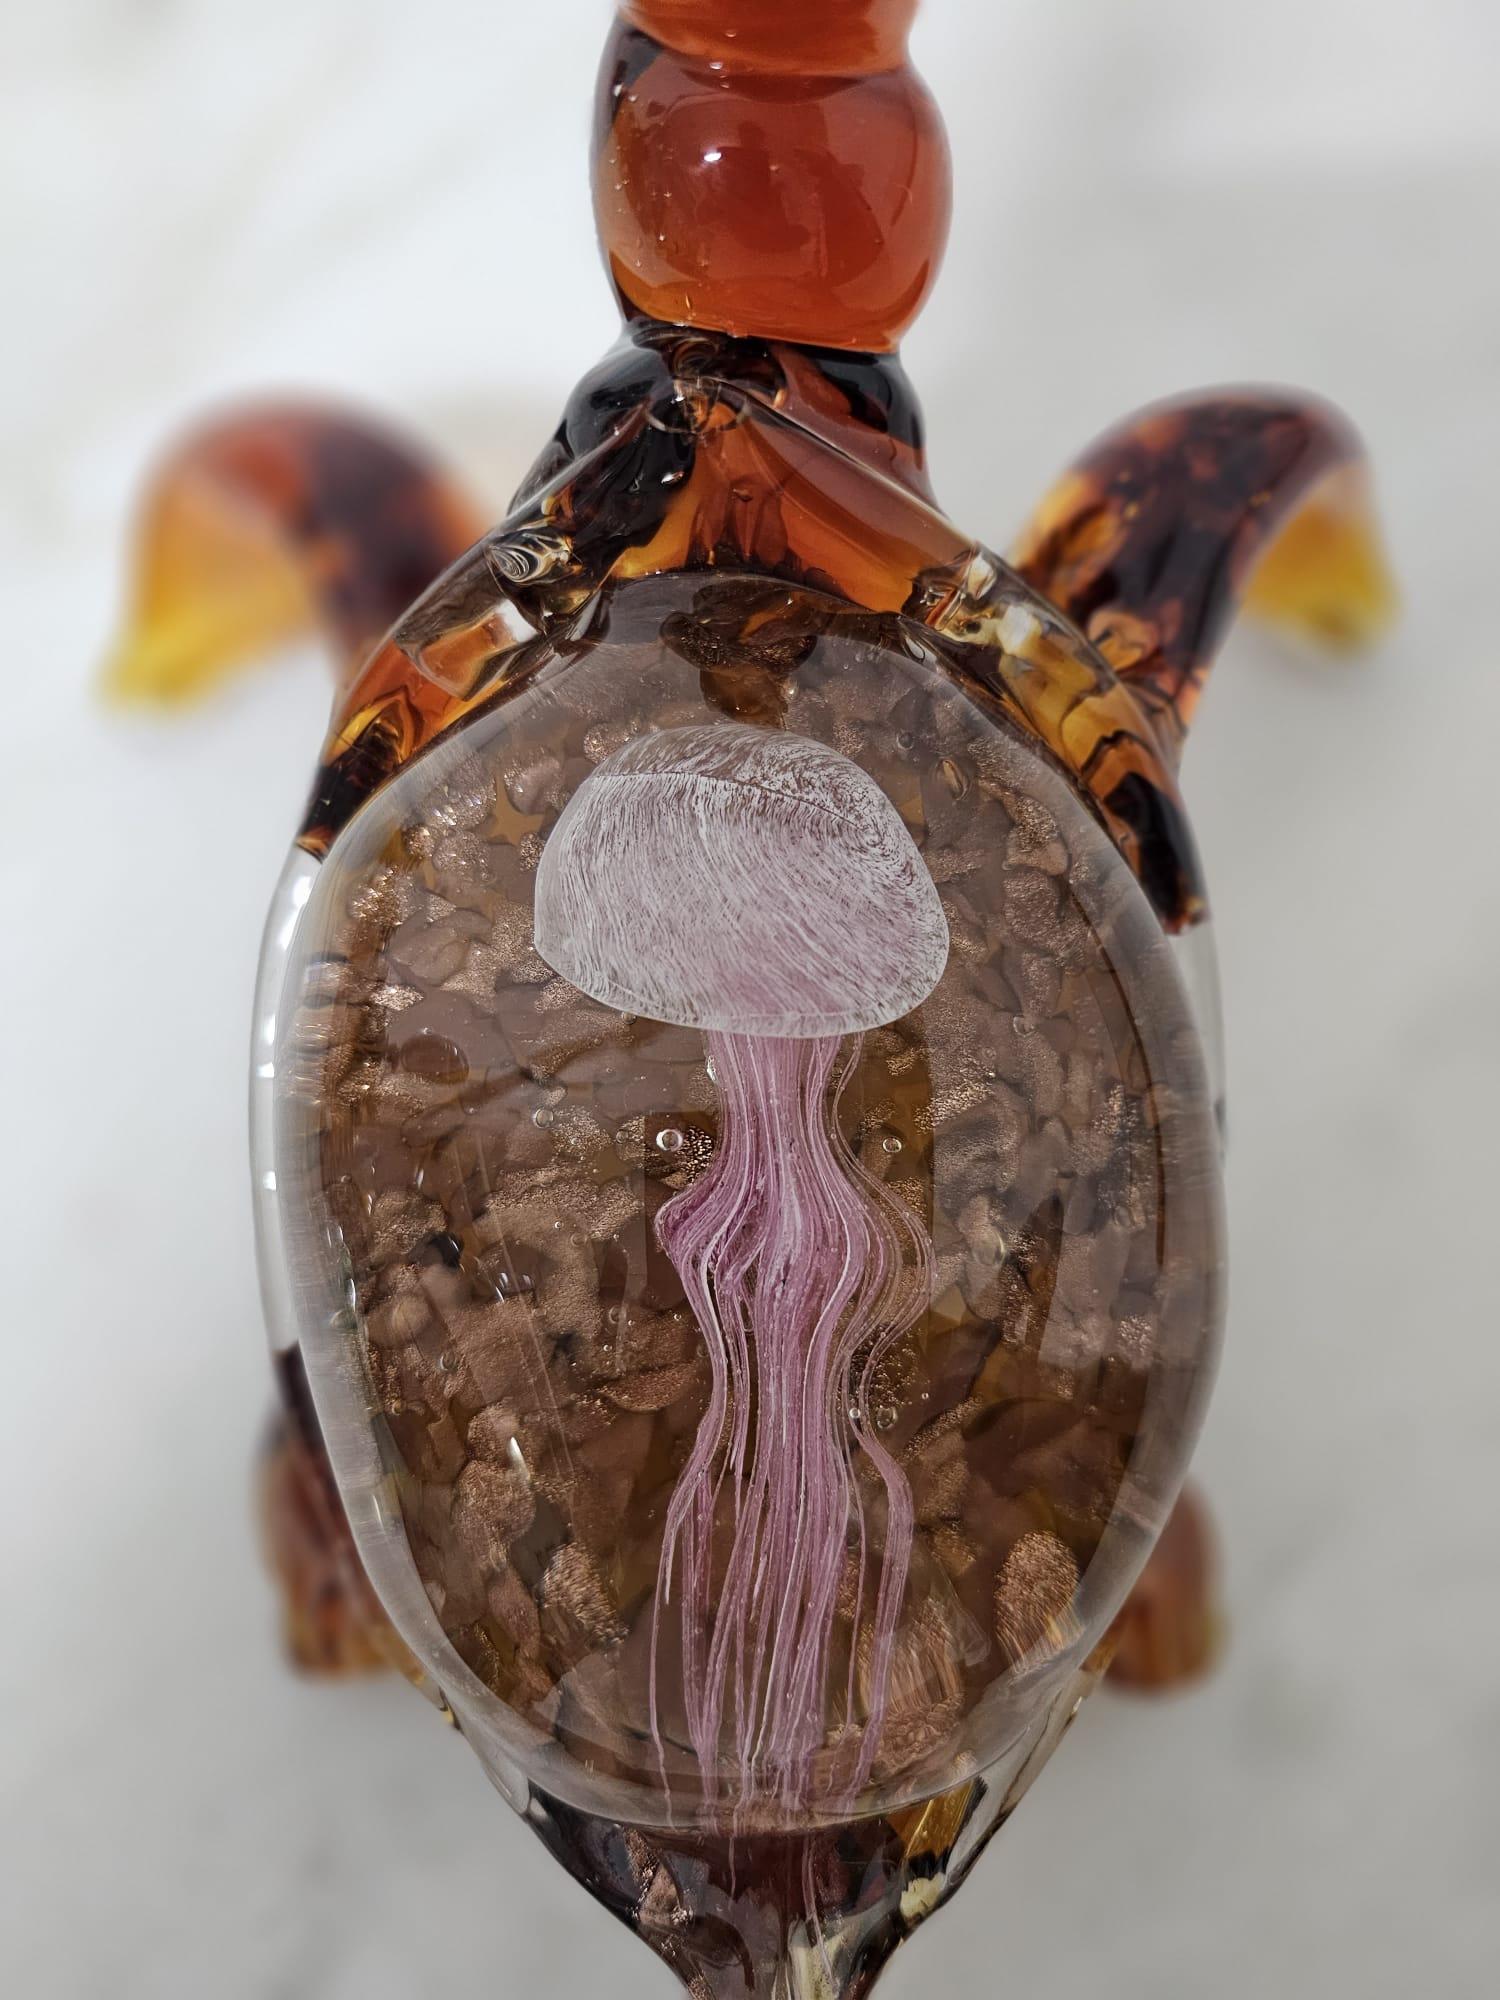 Murano glass turtle, jellyfish inside the shell, 1970s
Very particular polychrome object in Murano glass. Turtle with a jellyfish inside its shell.
Excellent condition. 

We guarantee adequate packaging and will ship via DHL, insuring the contents